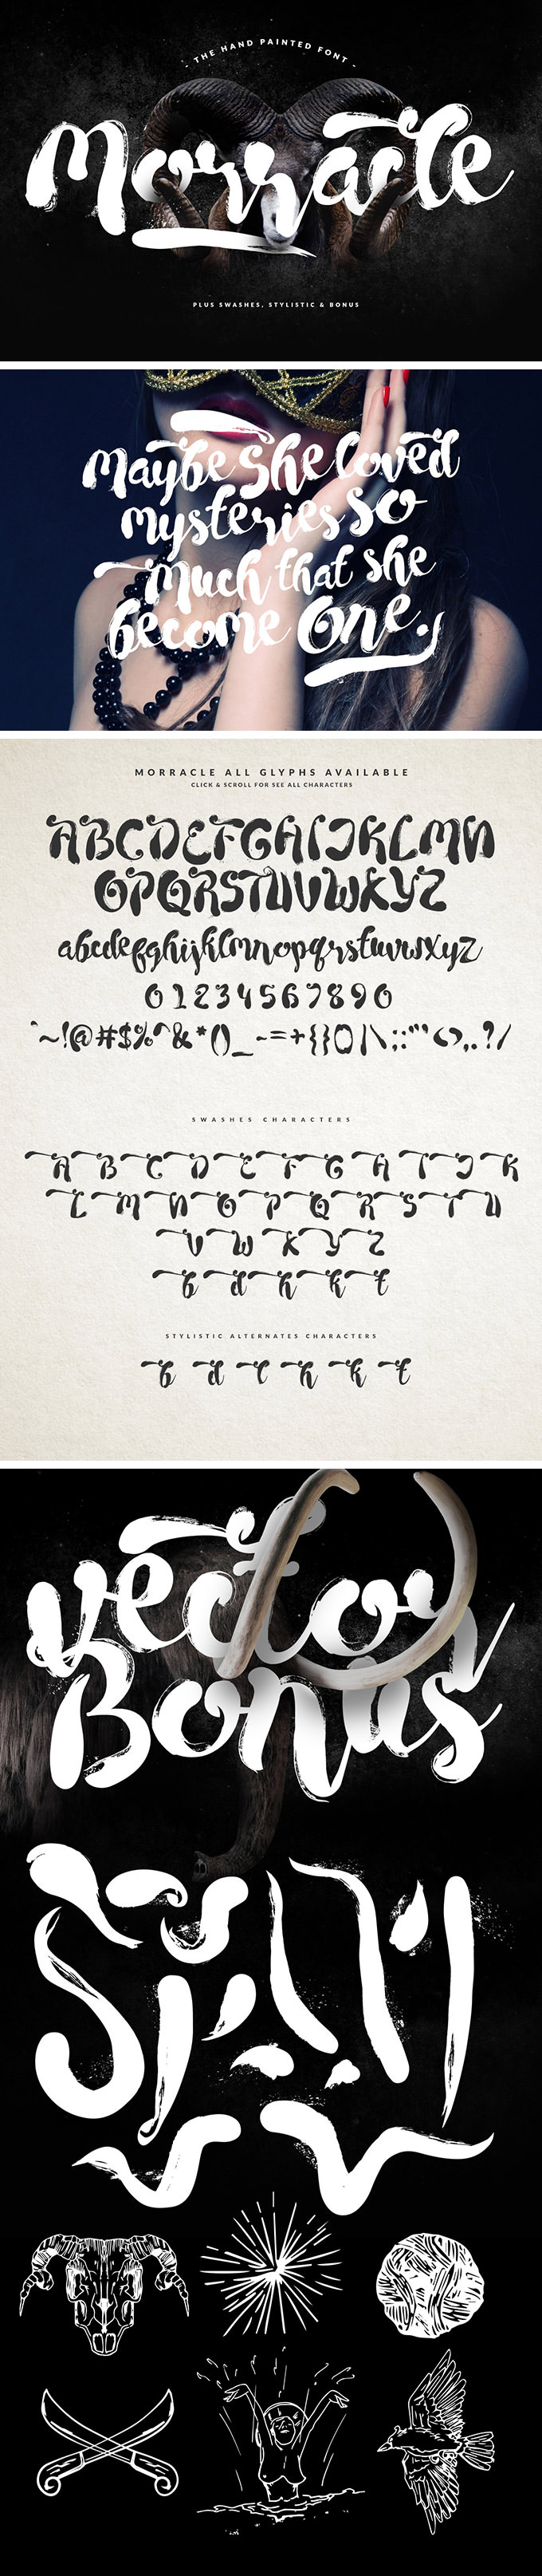 Morracle free font